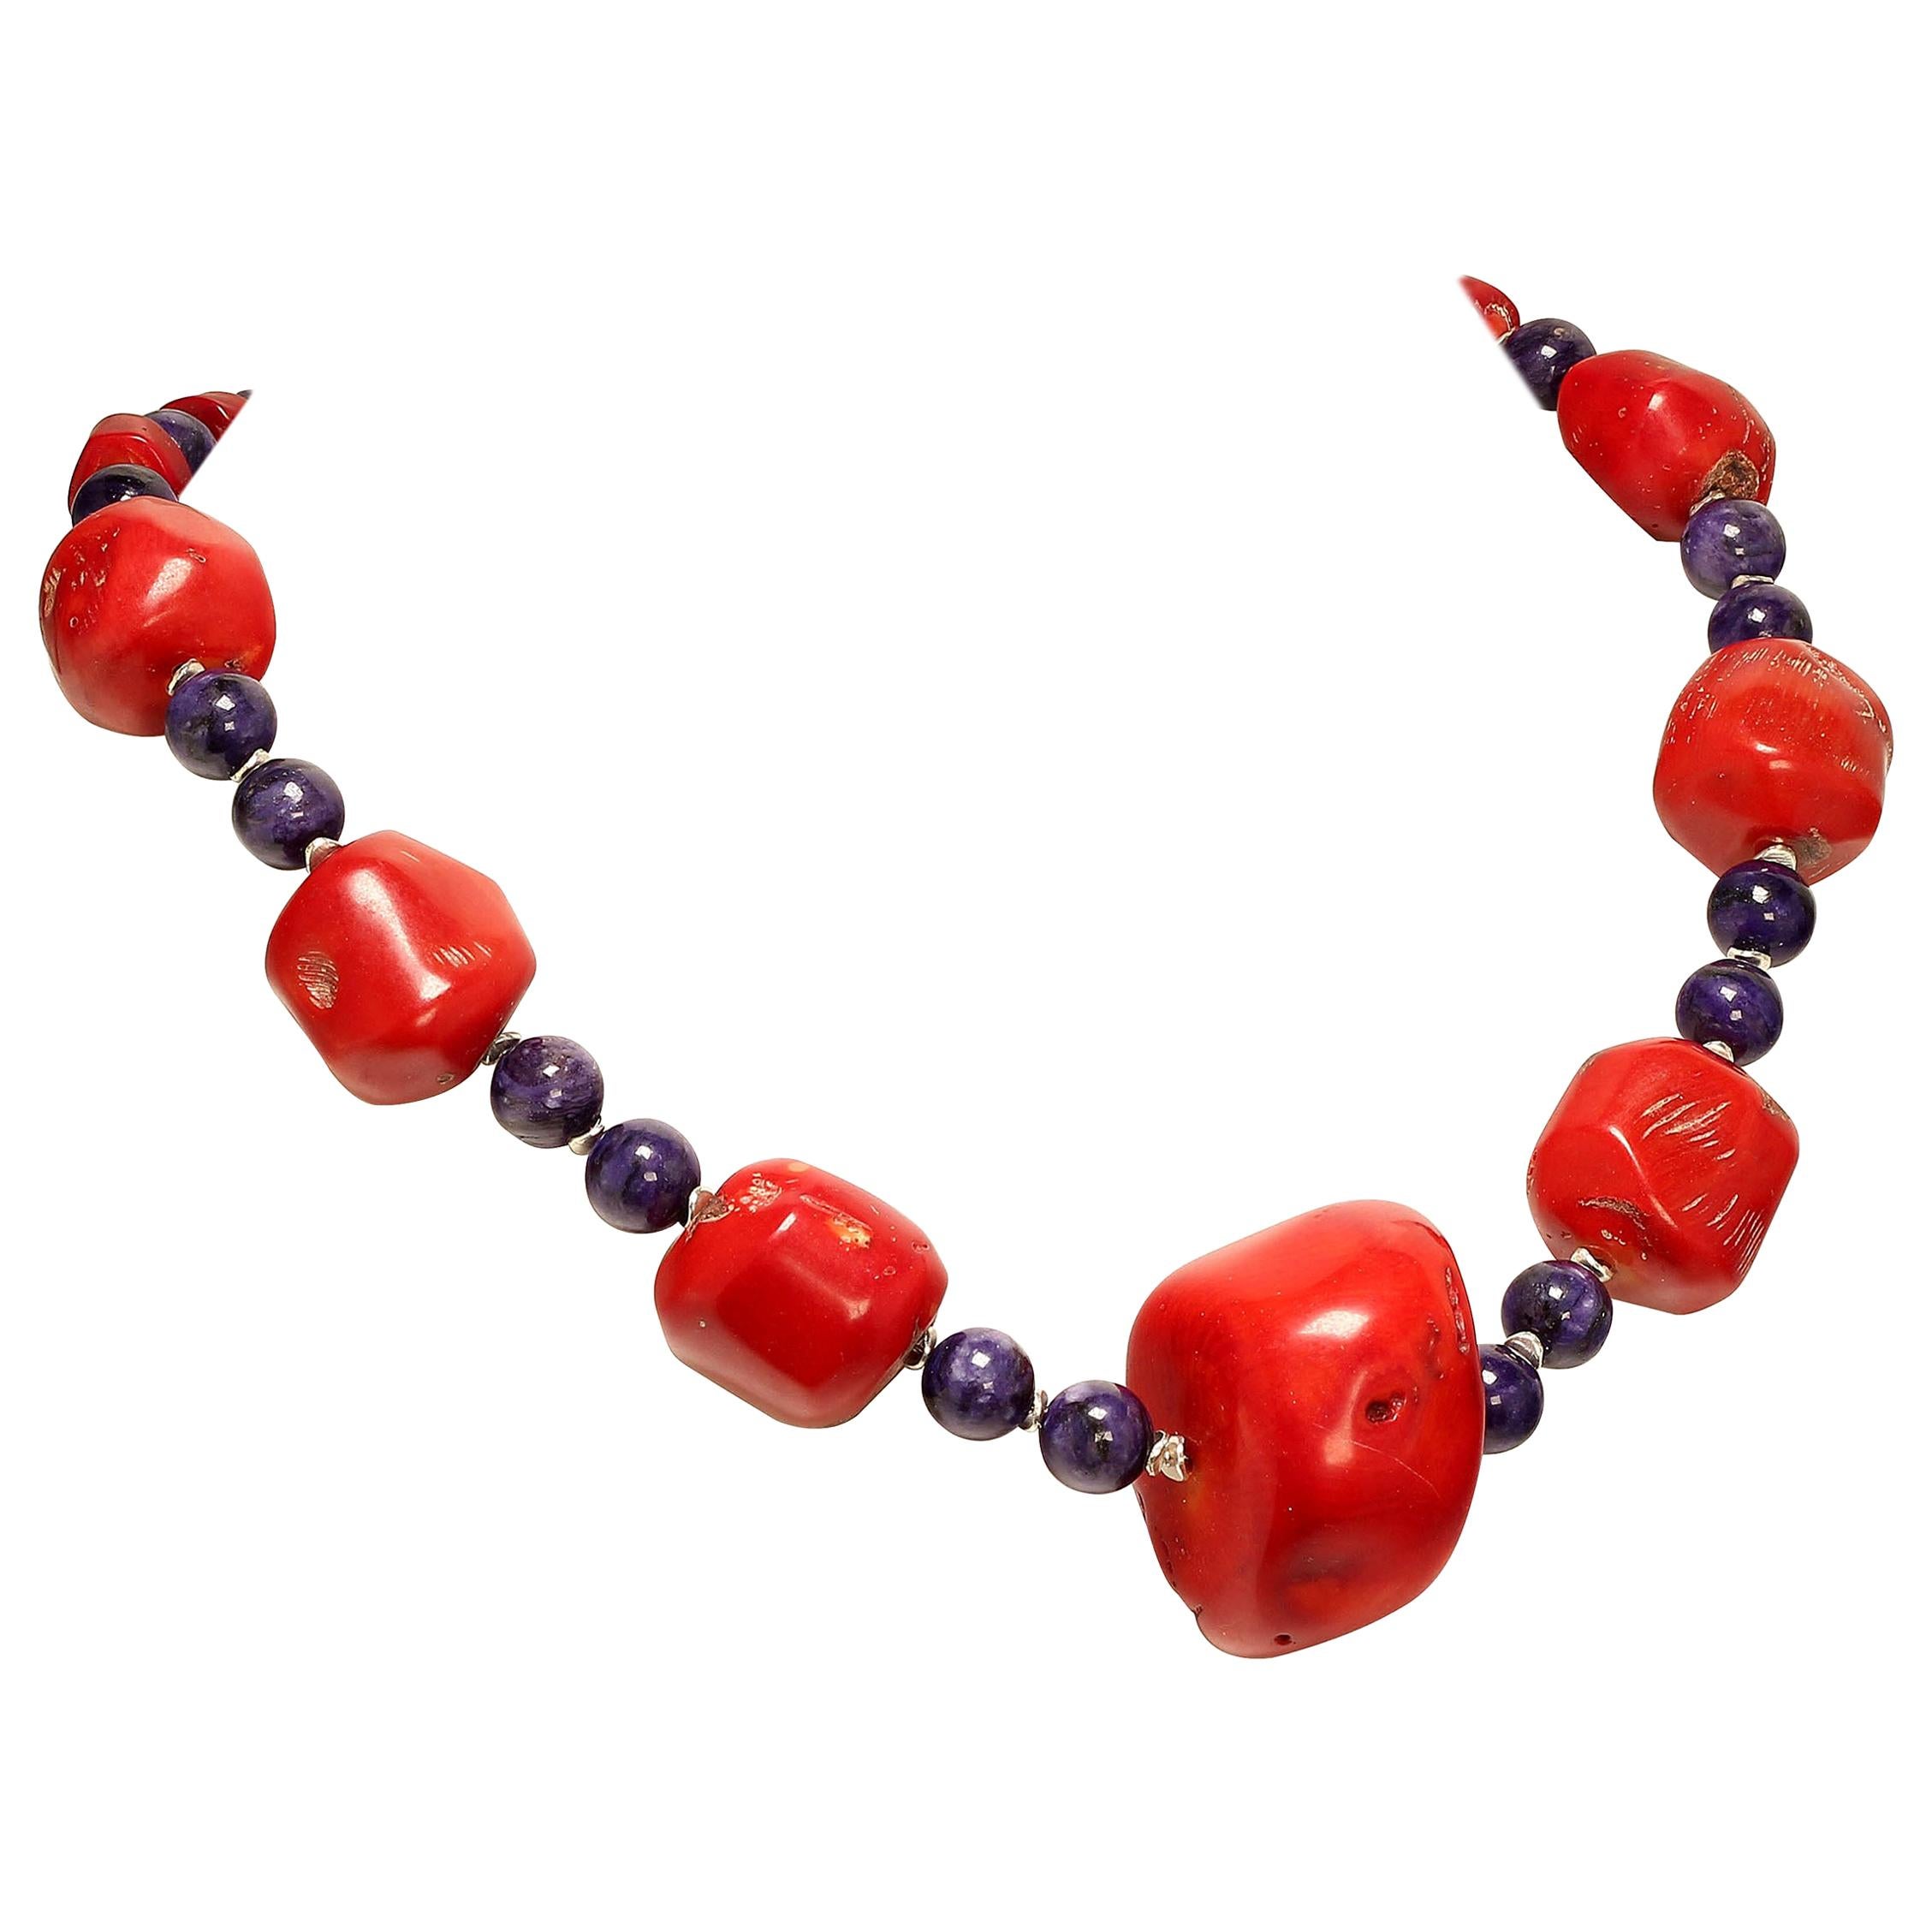 Unique and elegantly stylish Coral and Charoite necklace. Your first question is 'what is charoite?' Charoite is a lovely purple Russian mineral from the Chara River region, hence the name. It can be veined and mottled and have distinctive markings.